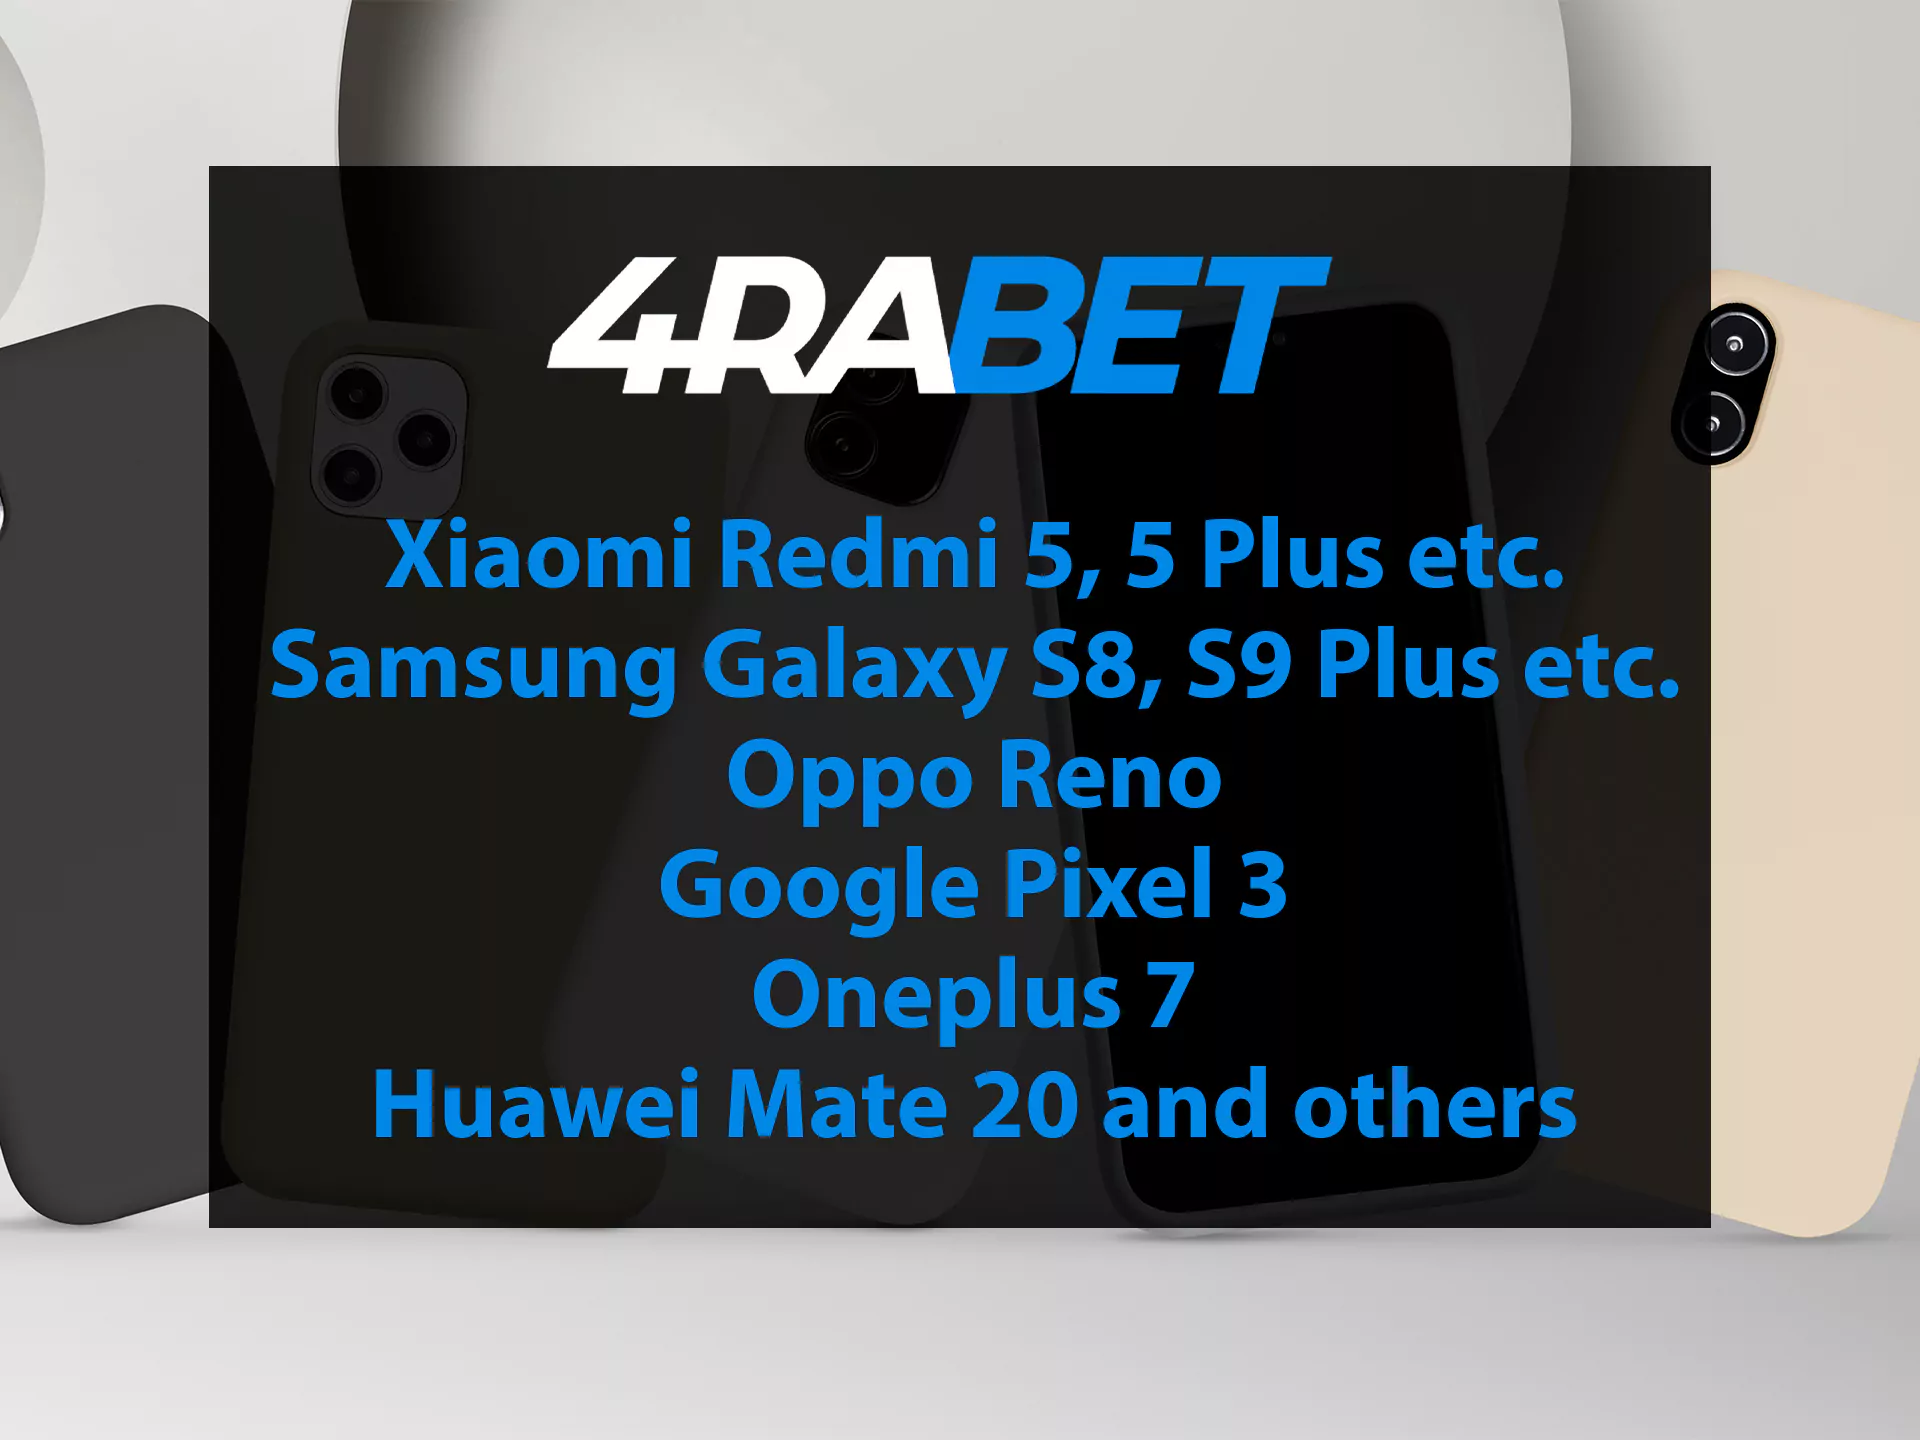 4rabet app works on almost every Android device.